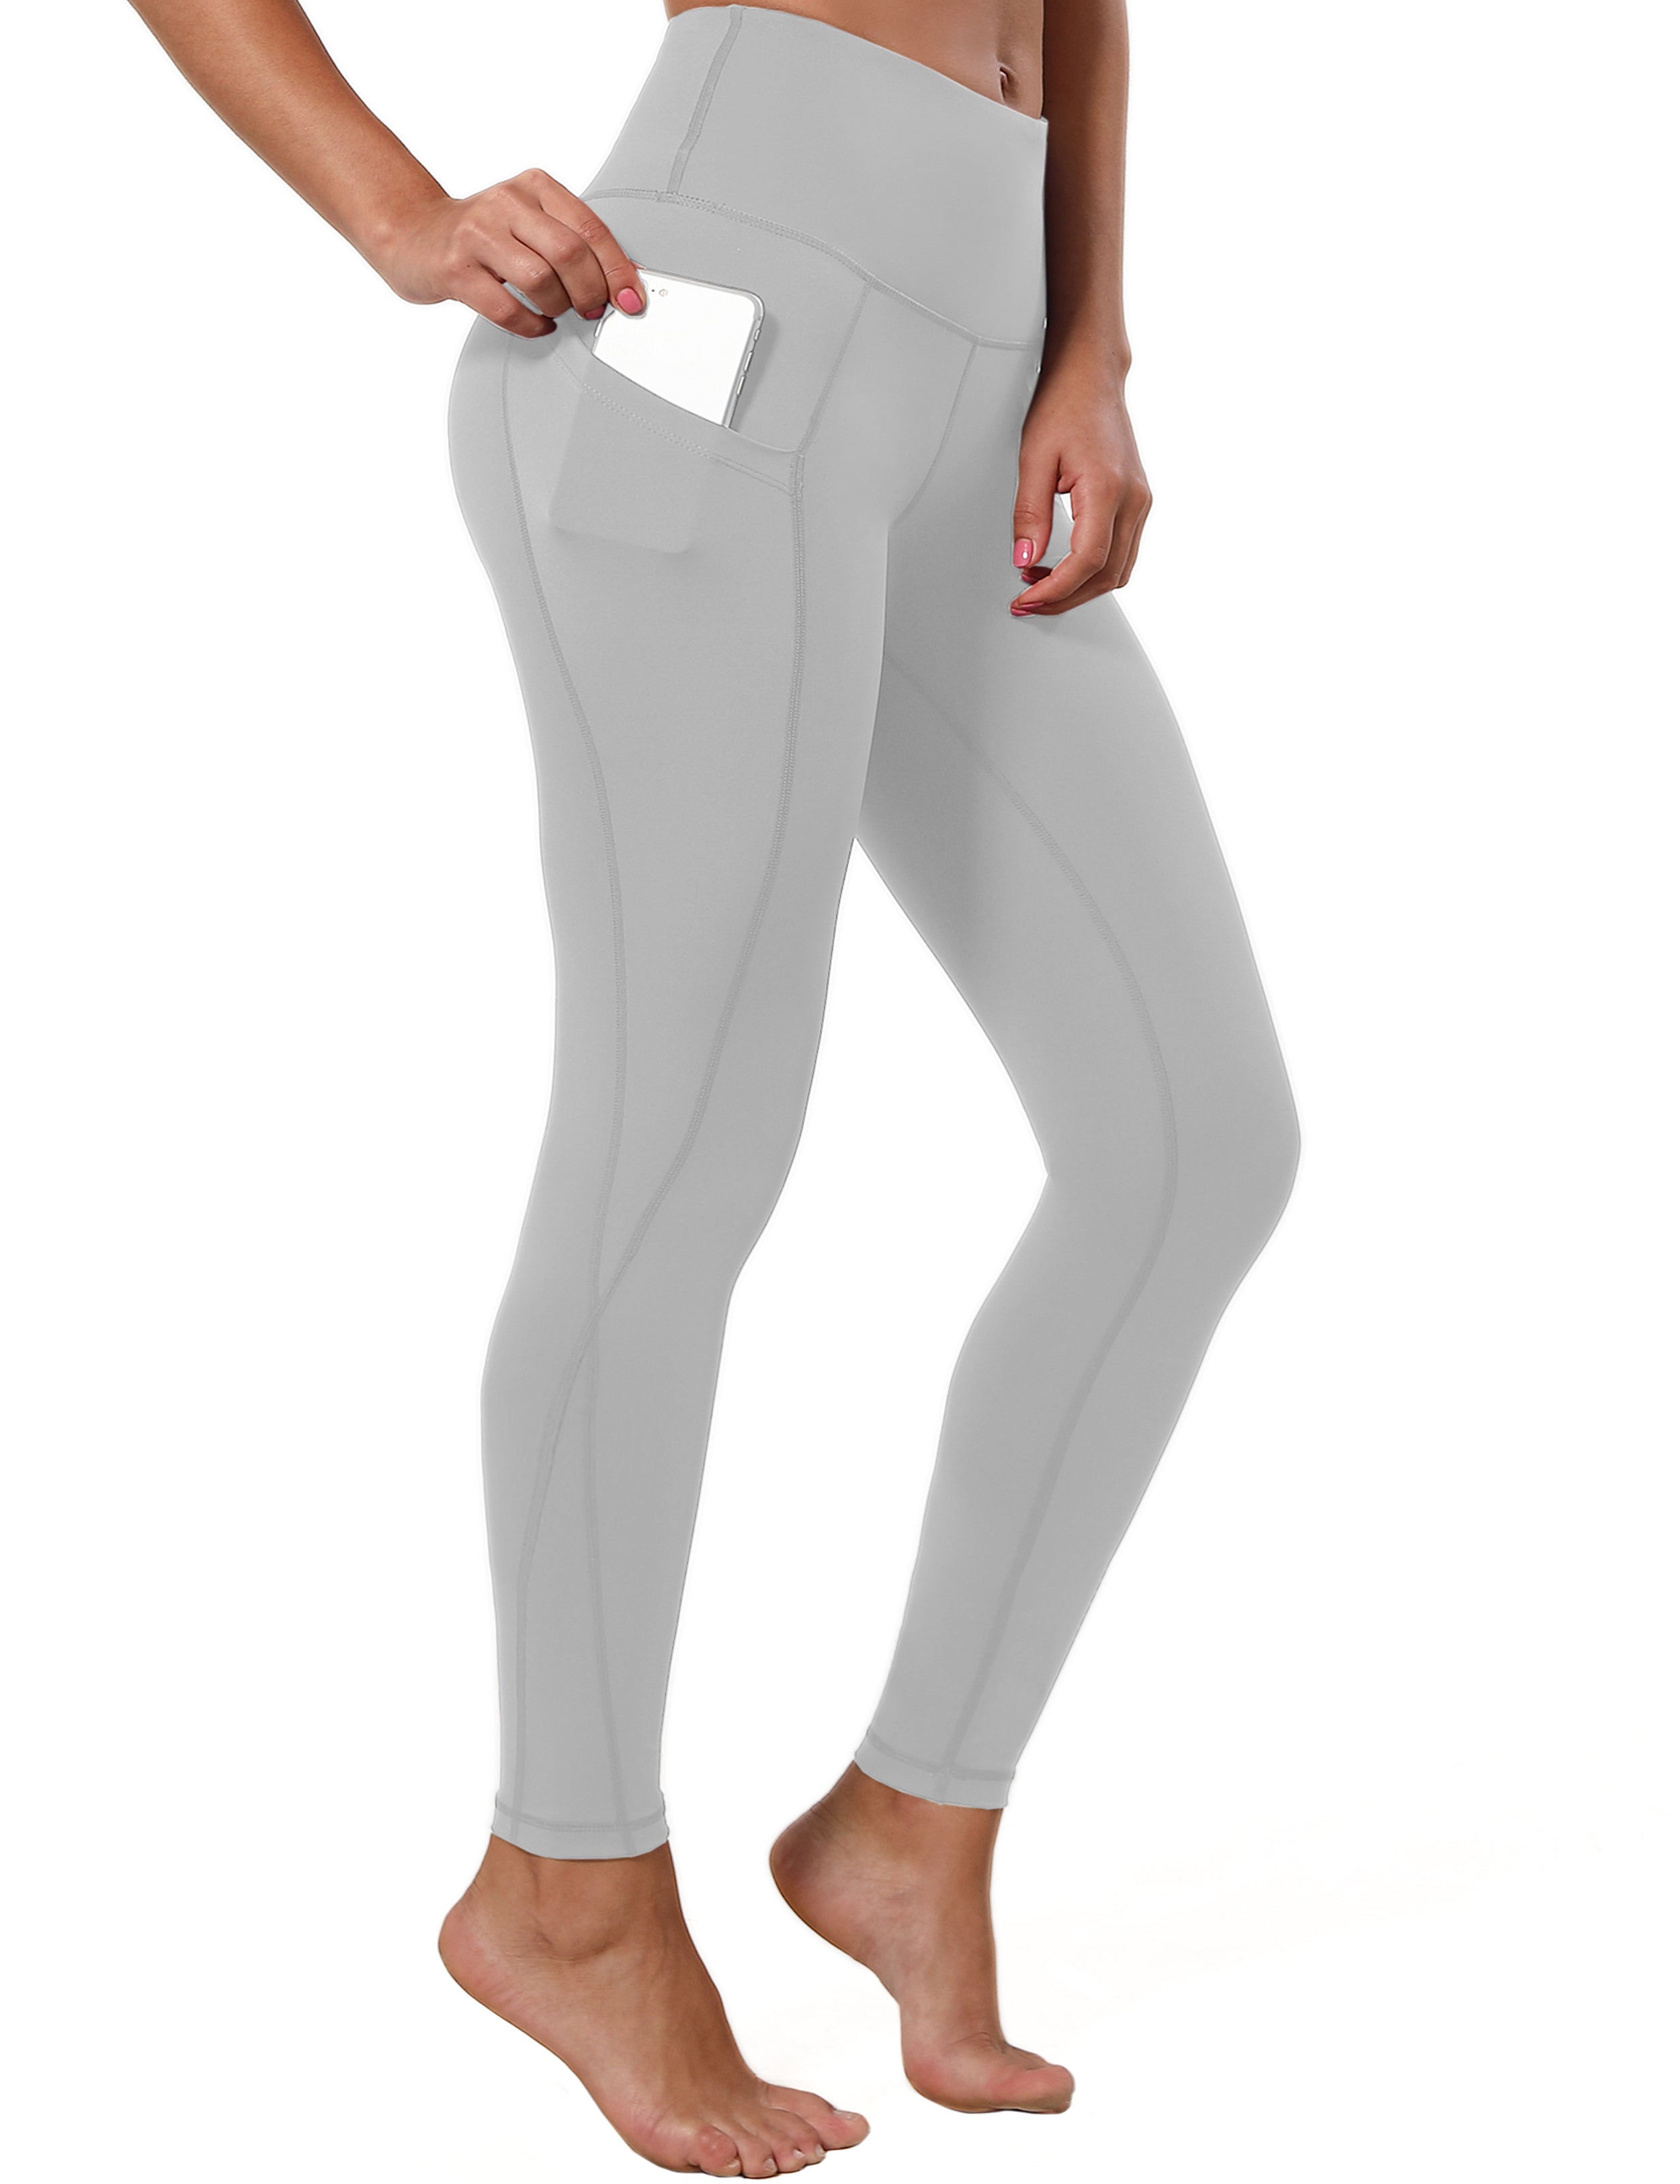 High Waist Side Pockets Golf Pants lightgray 75% Nylon, 25% Spandex Fabric doesn't attract lint easily 4-way stretch No see-through Moisture-wicking Tummy control Inner pocket